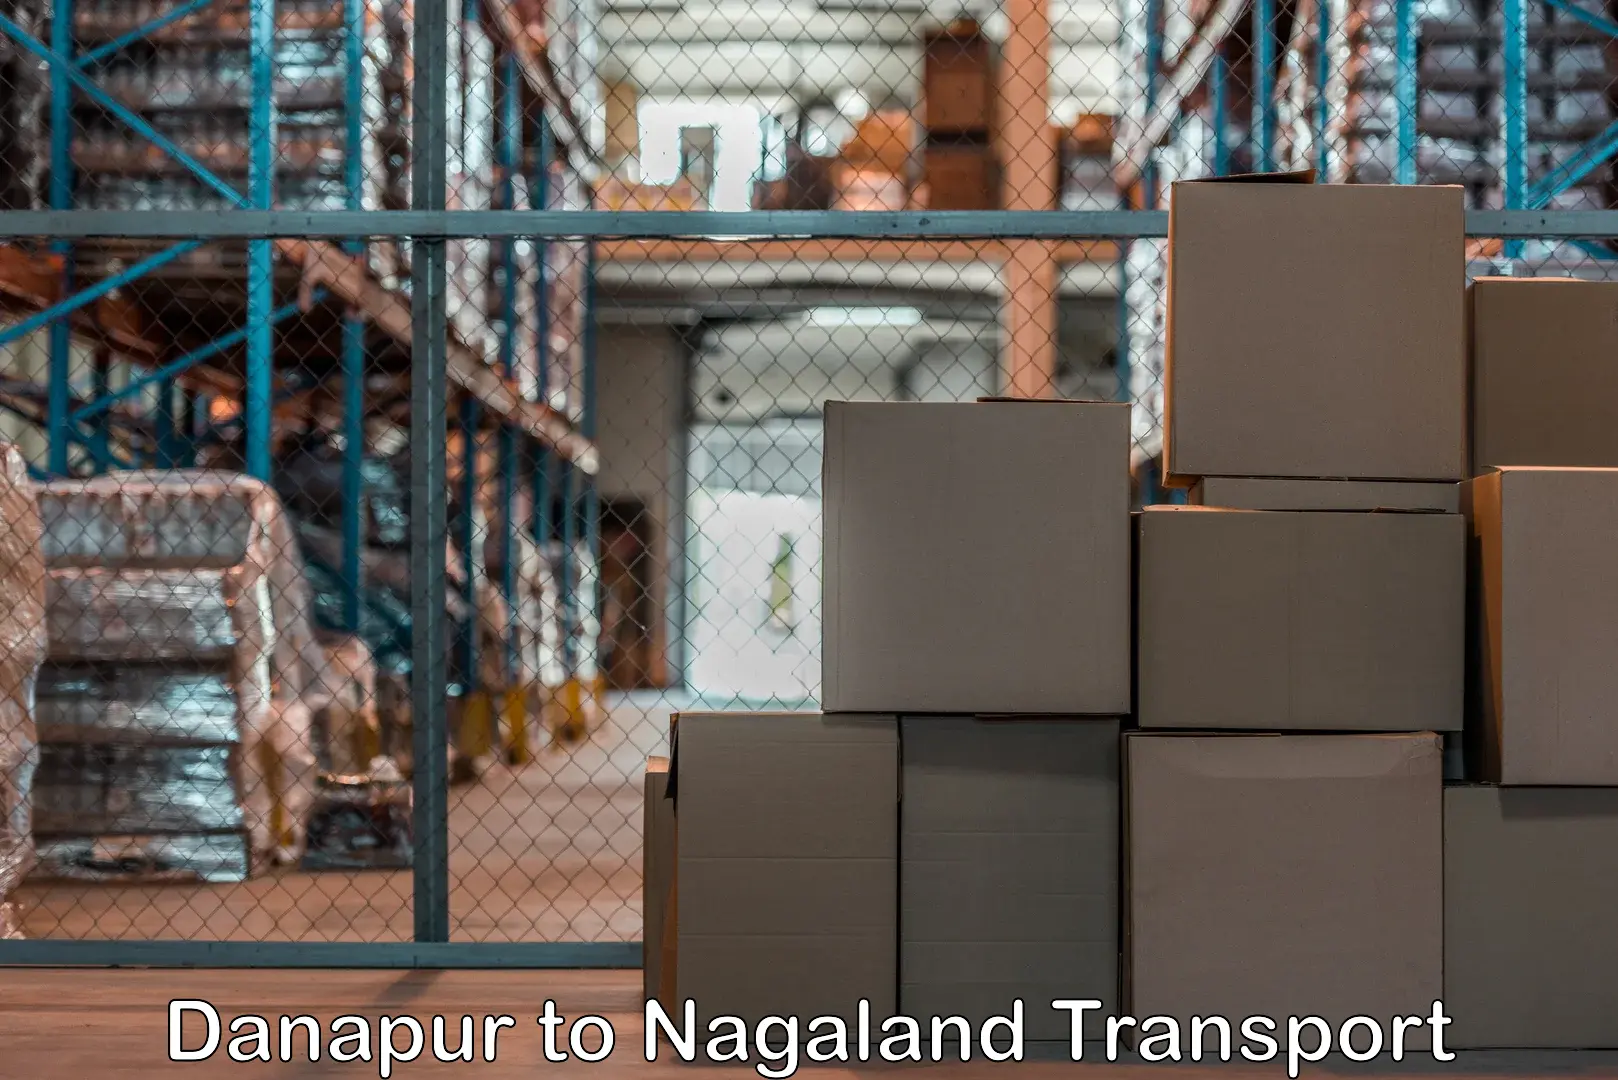 Delivery service Danapur to Nagaland